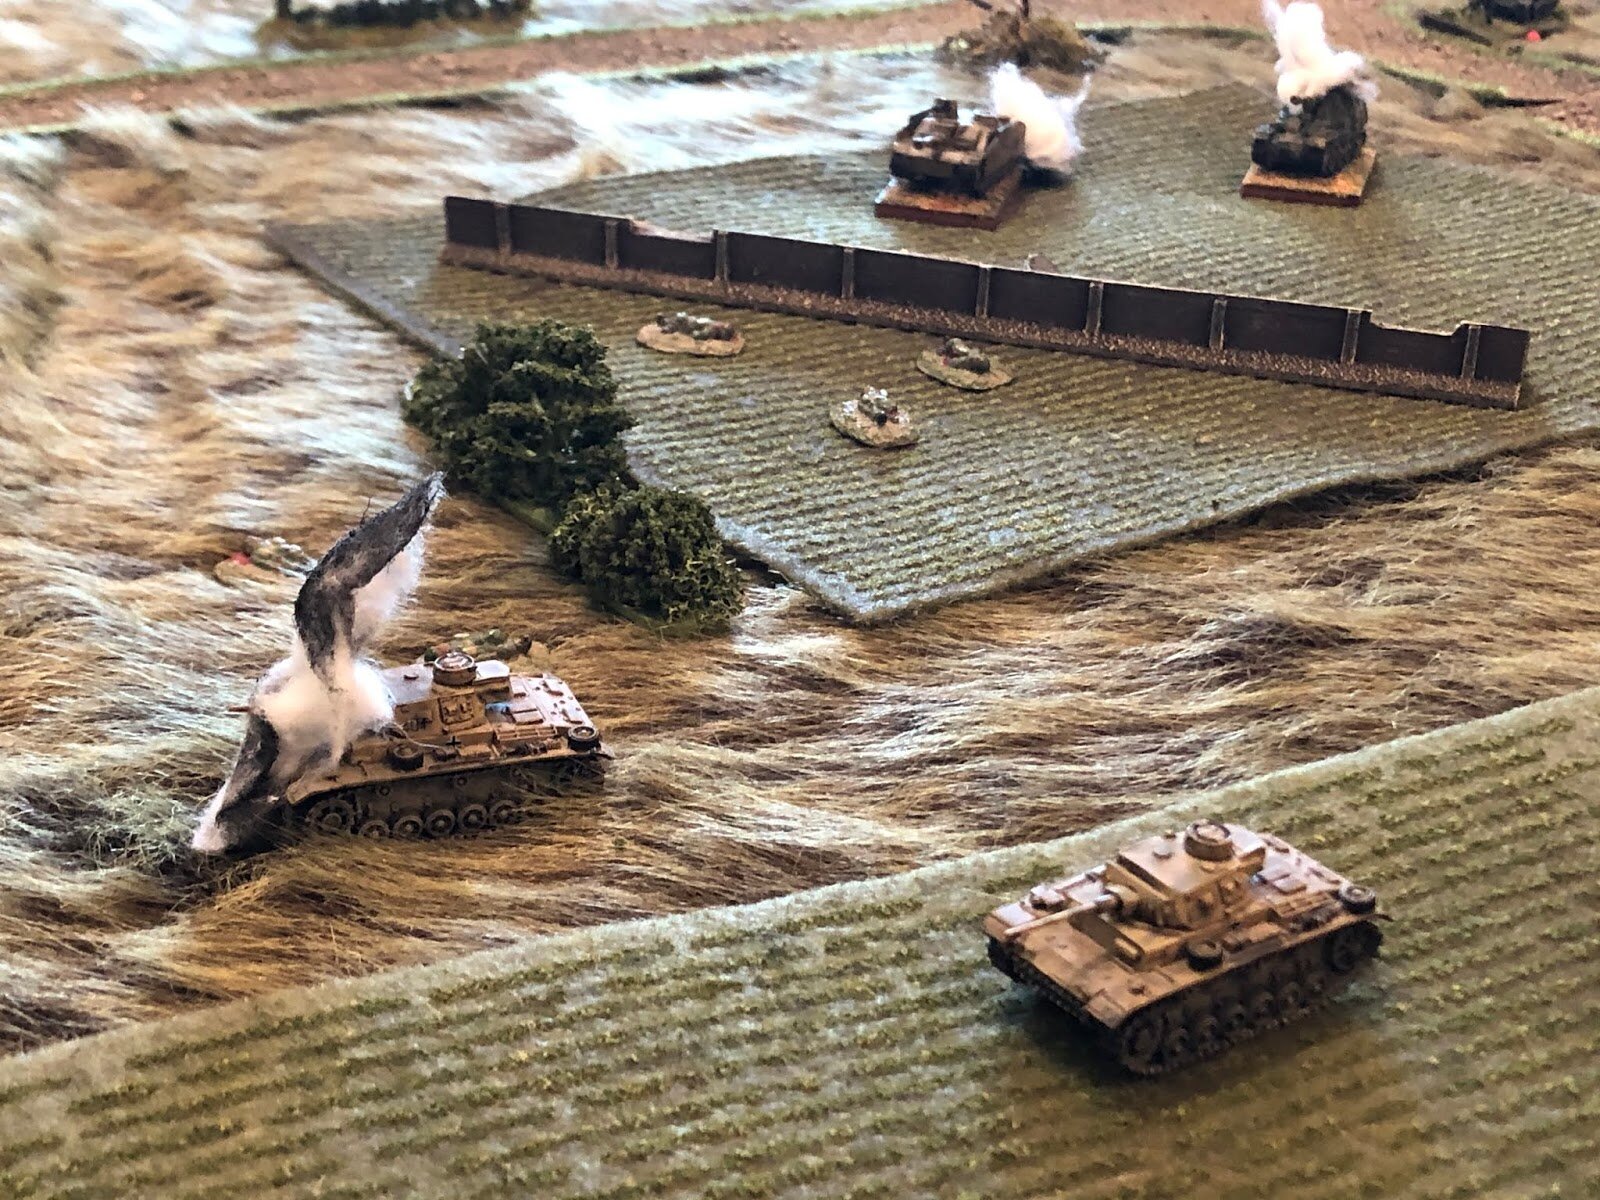 BAM!  One of the Panzer IIIs goes up in flames as the other's commander tries to figure out where the hell that came from!  One of the Stugs and the Marder burn in the background.